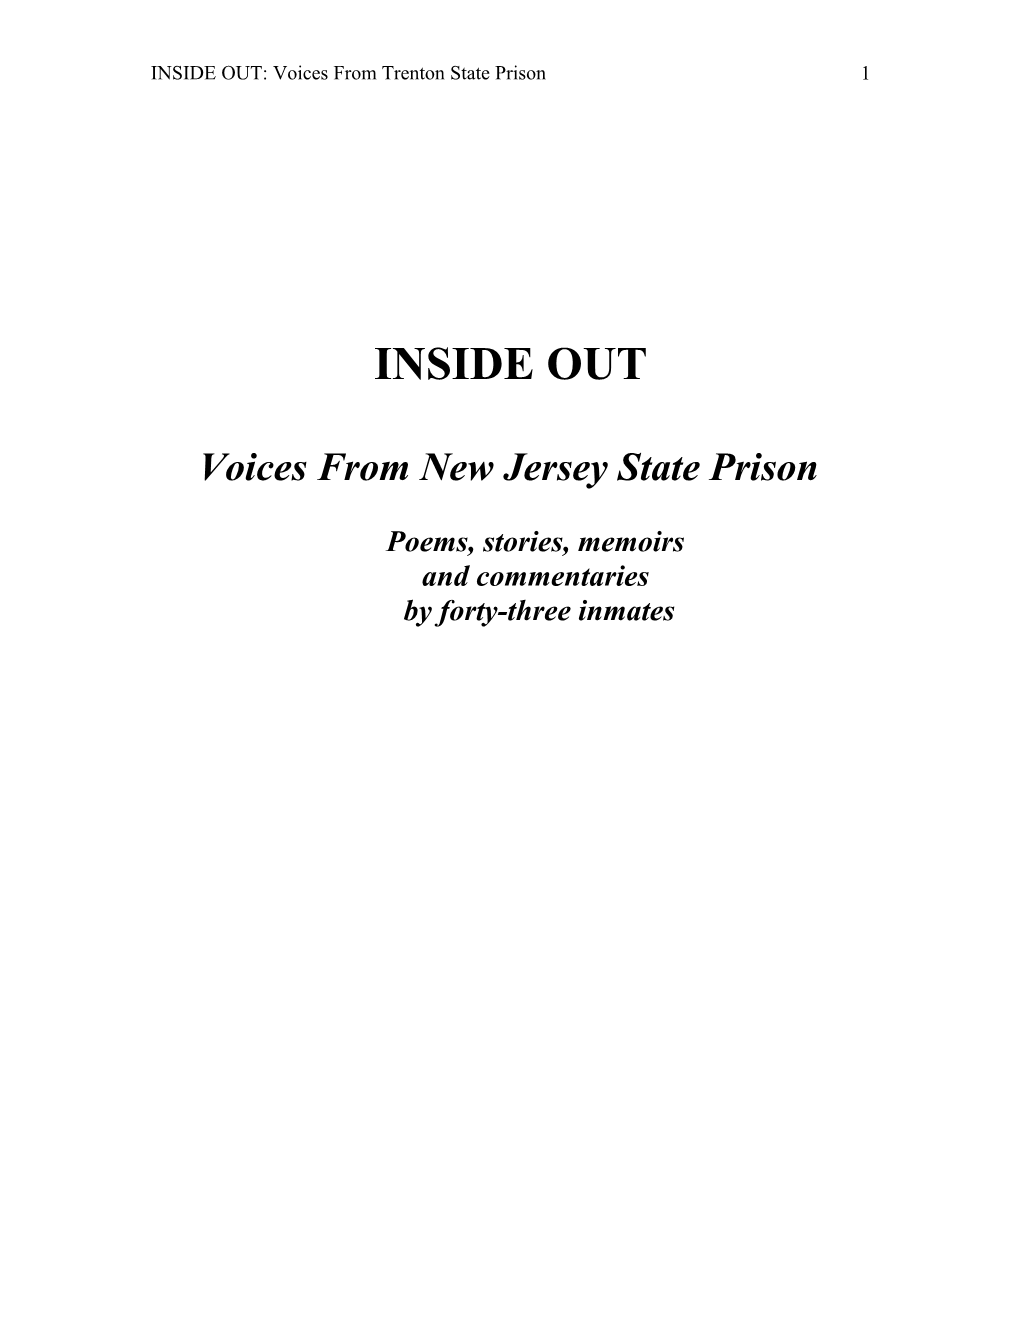 INSIDE OUT: Voices from Trenton State Prison